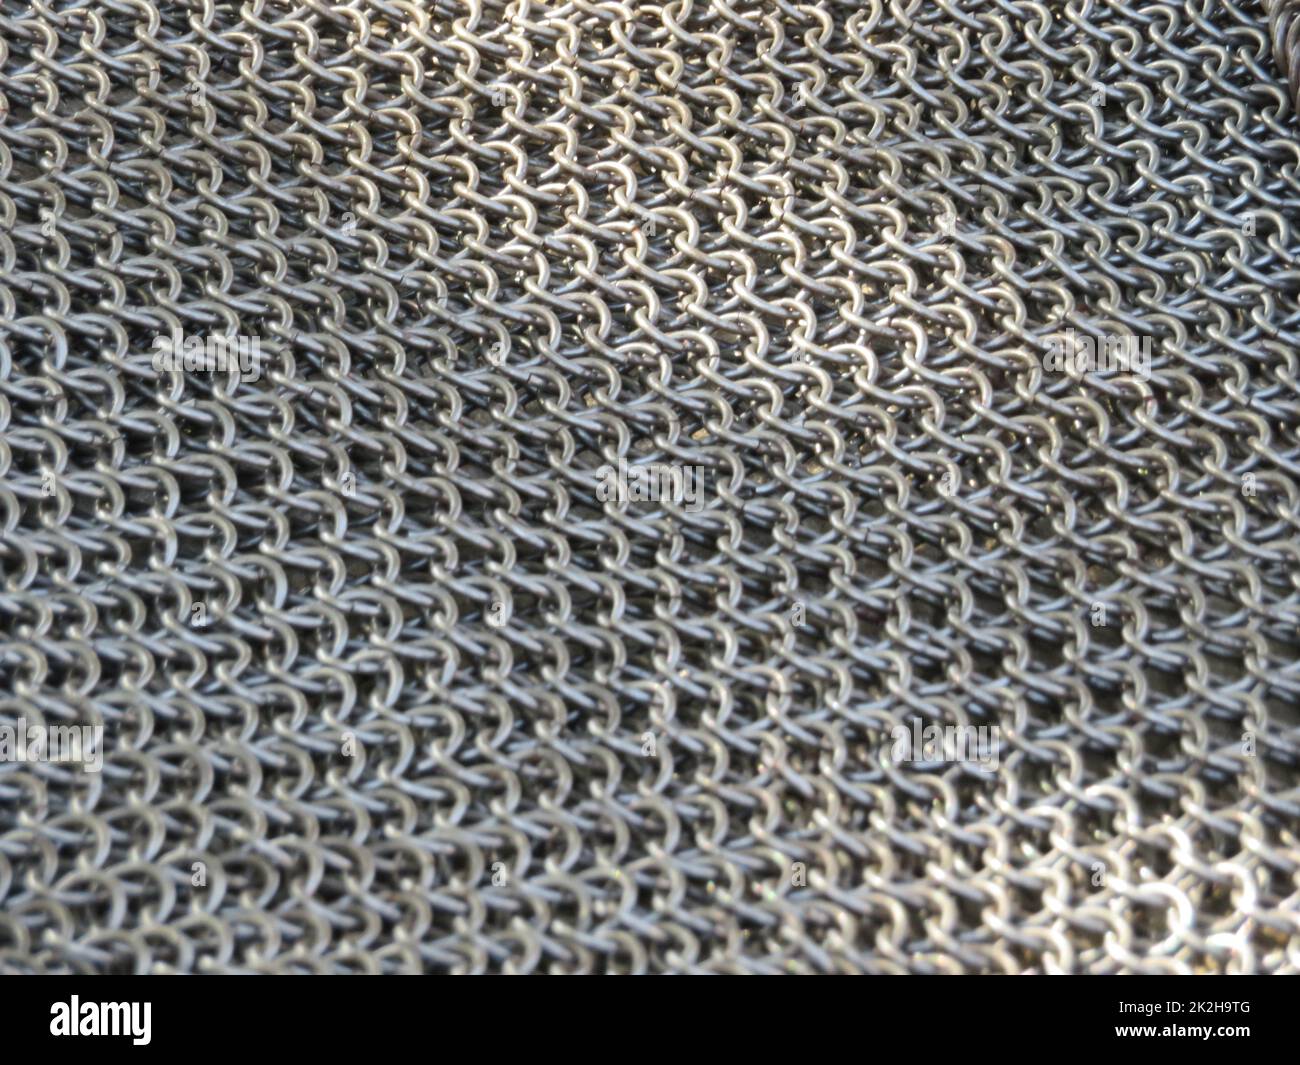 dimension mesh protection against cuts punctures heavy safety Stock Photo